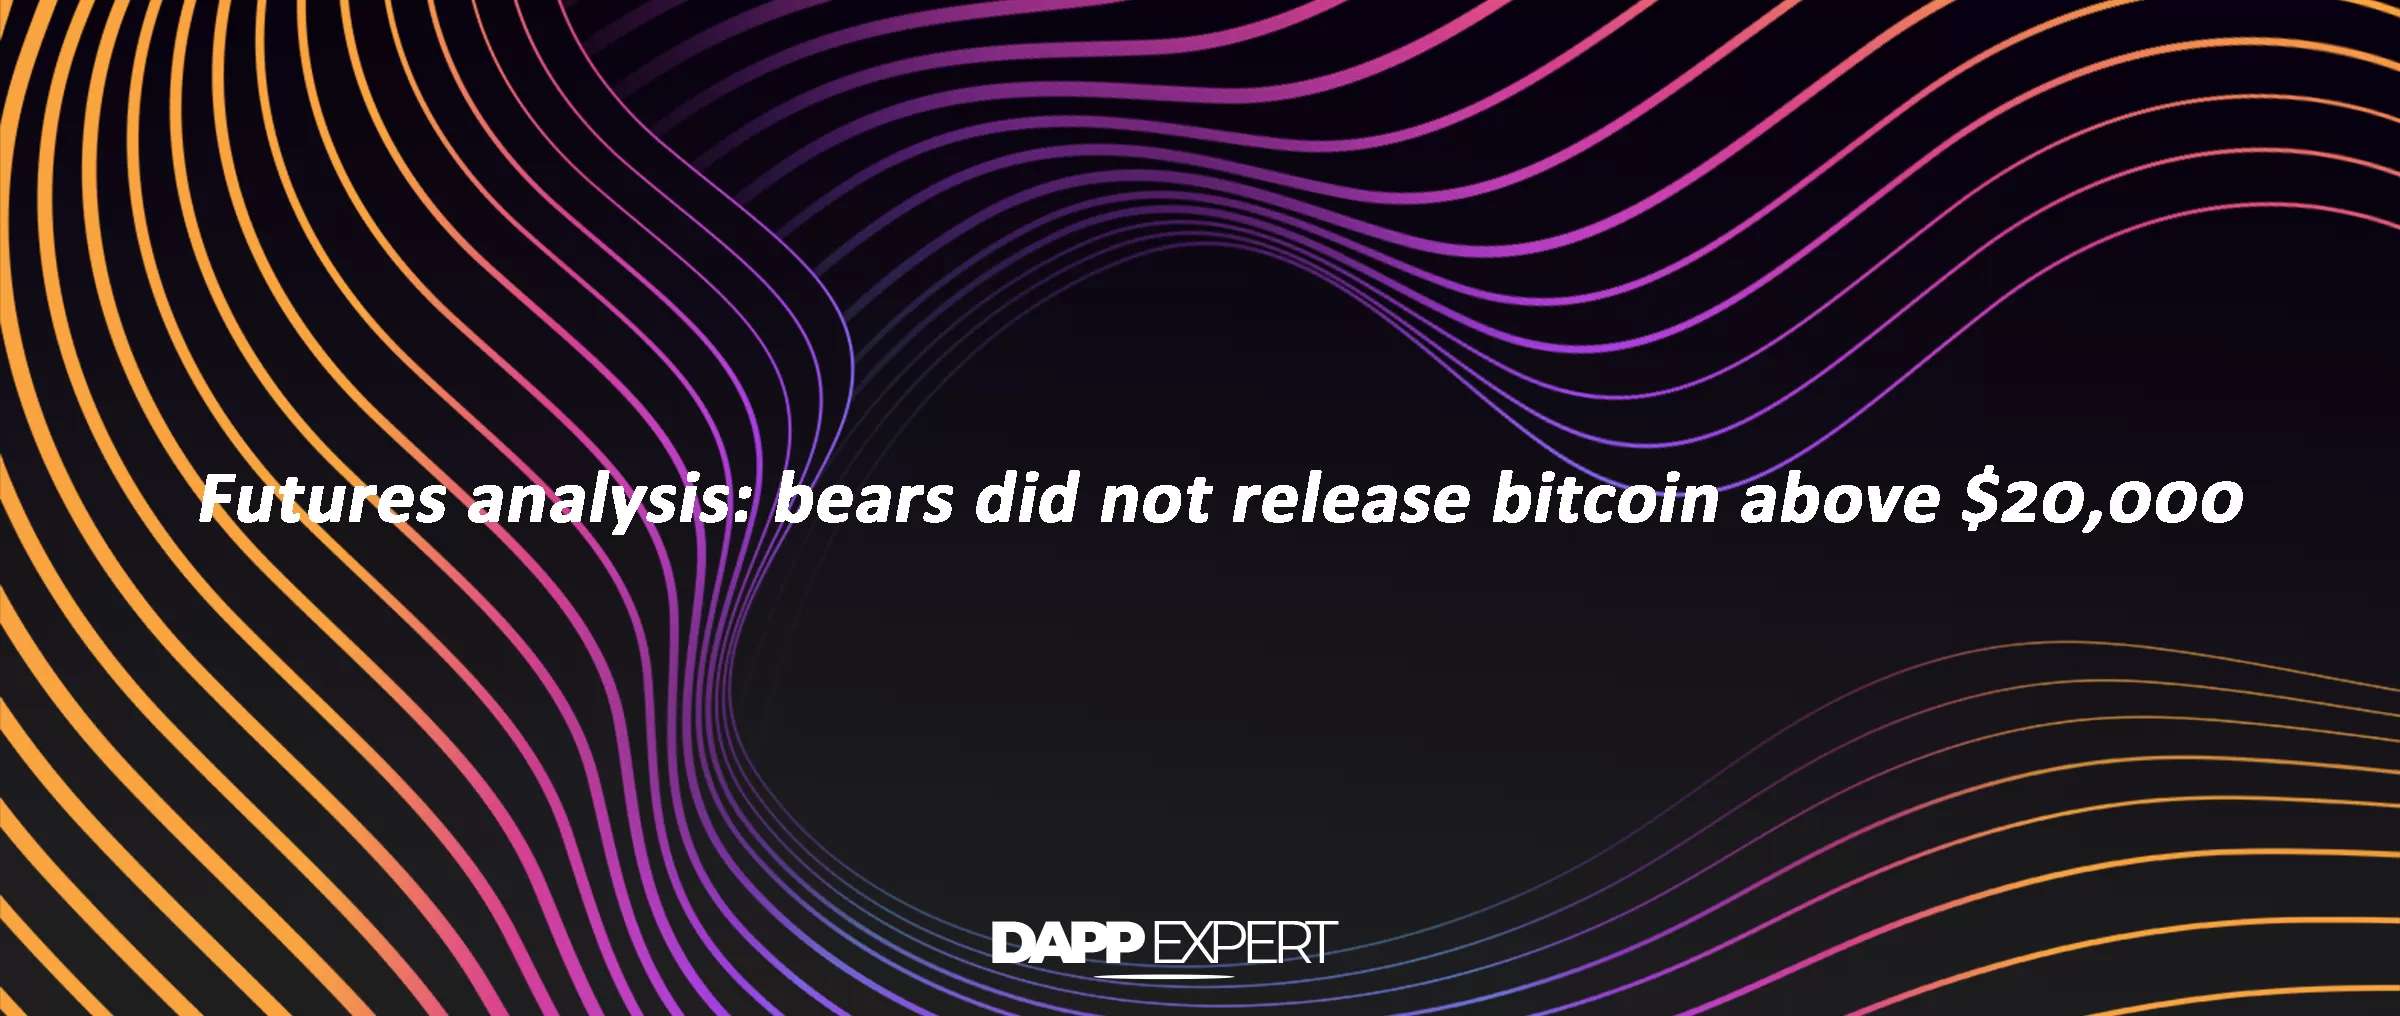 Futures analysis: bears did not release bitcoin above $20,000